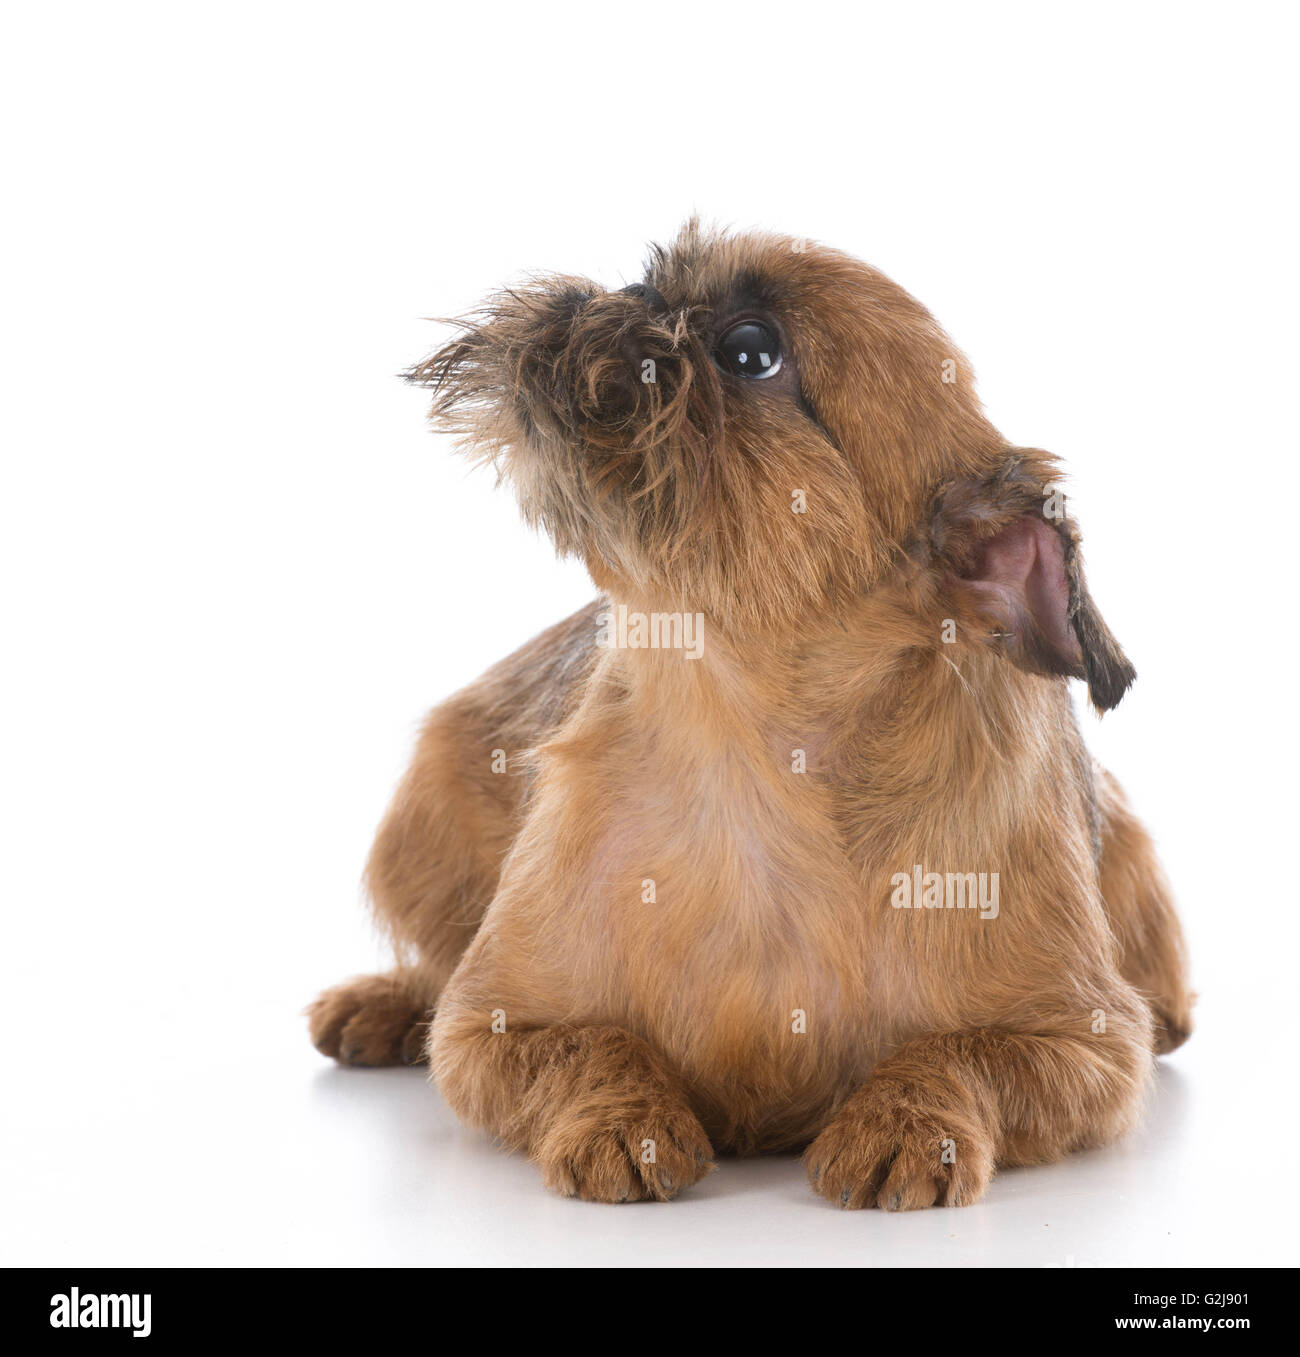 brussels griffon puppy laying down on white background Stock Photo